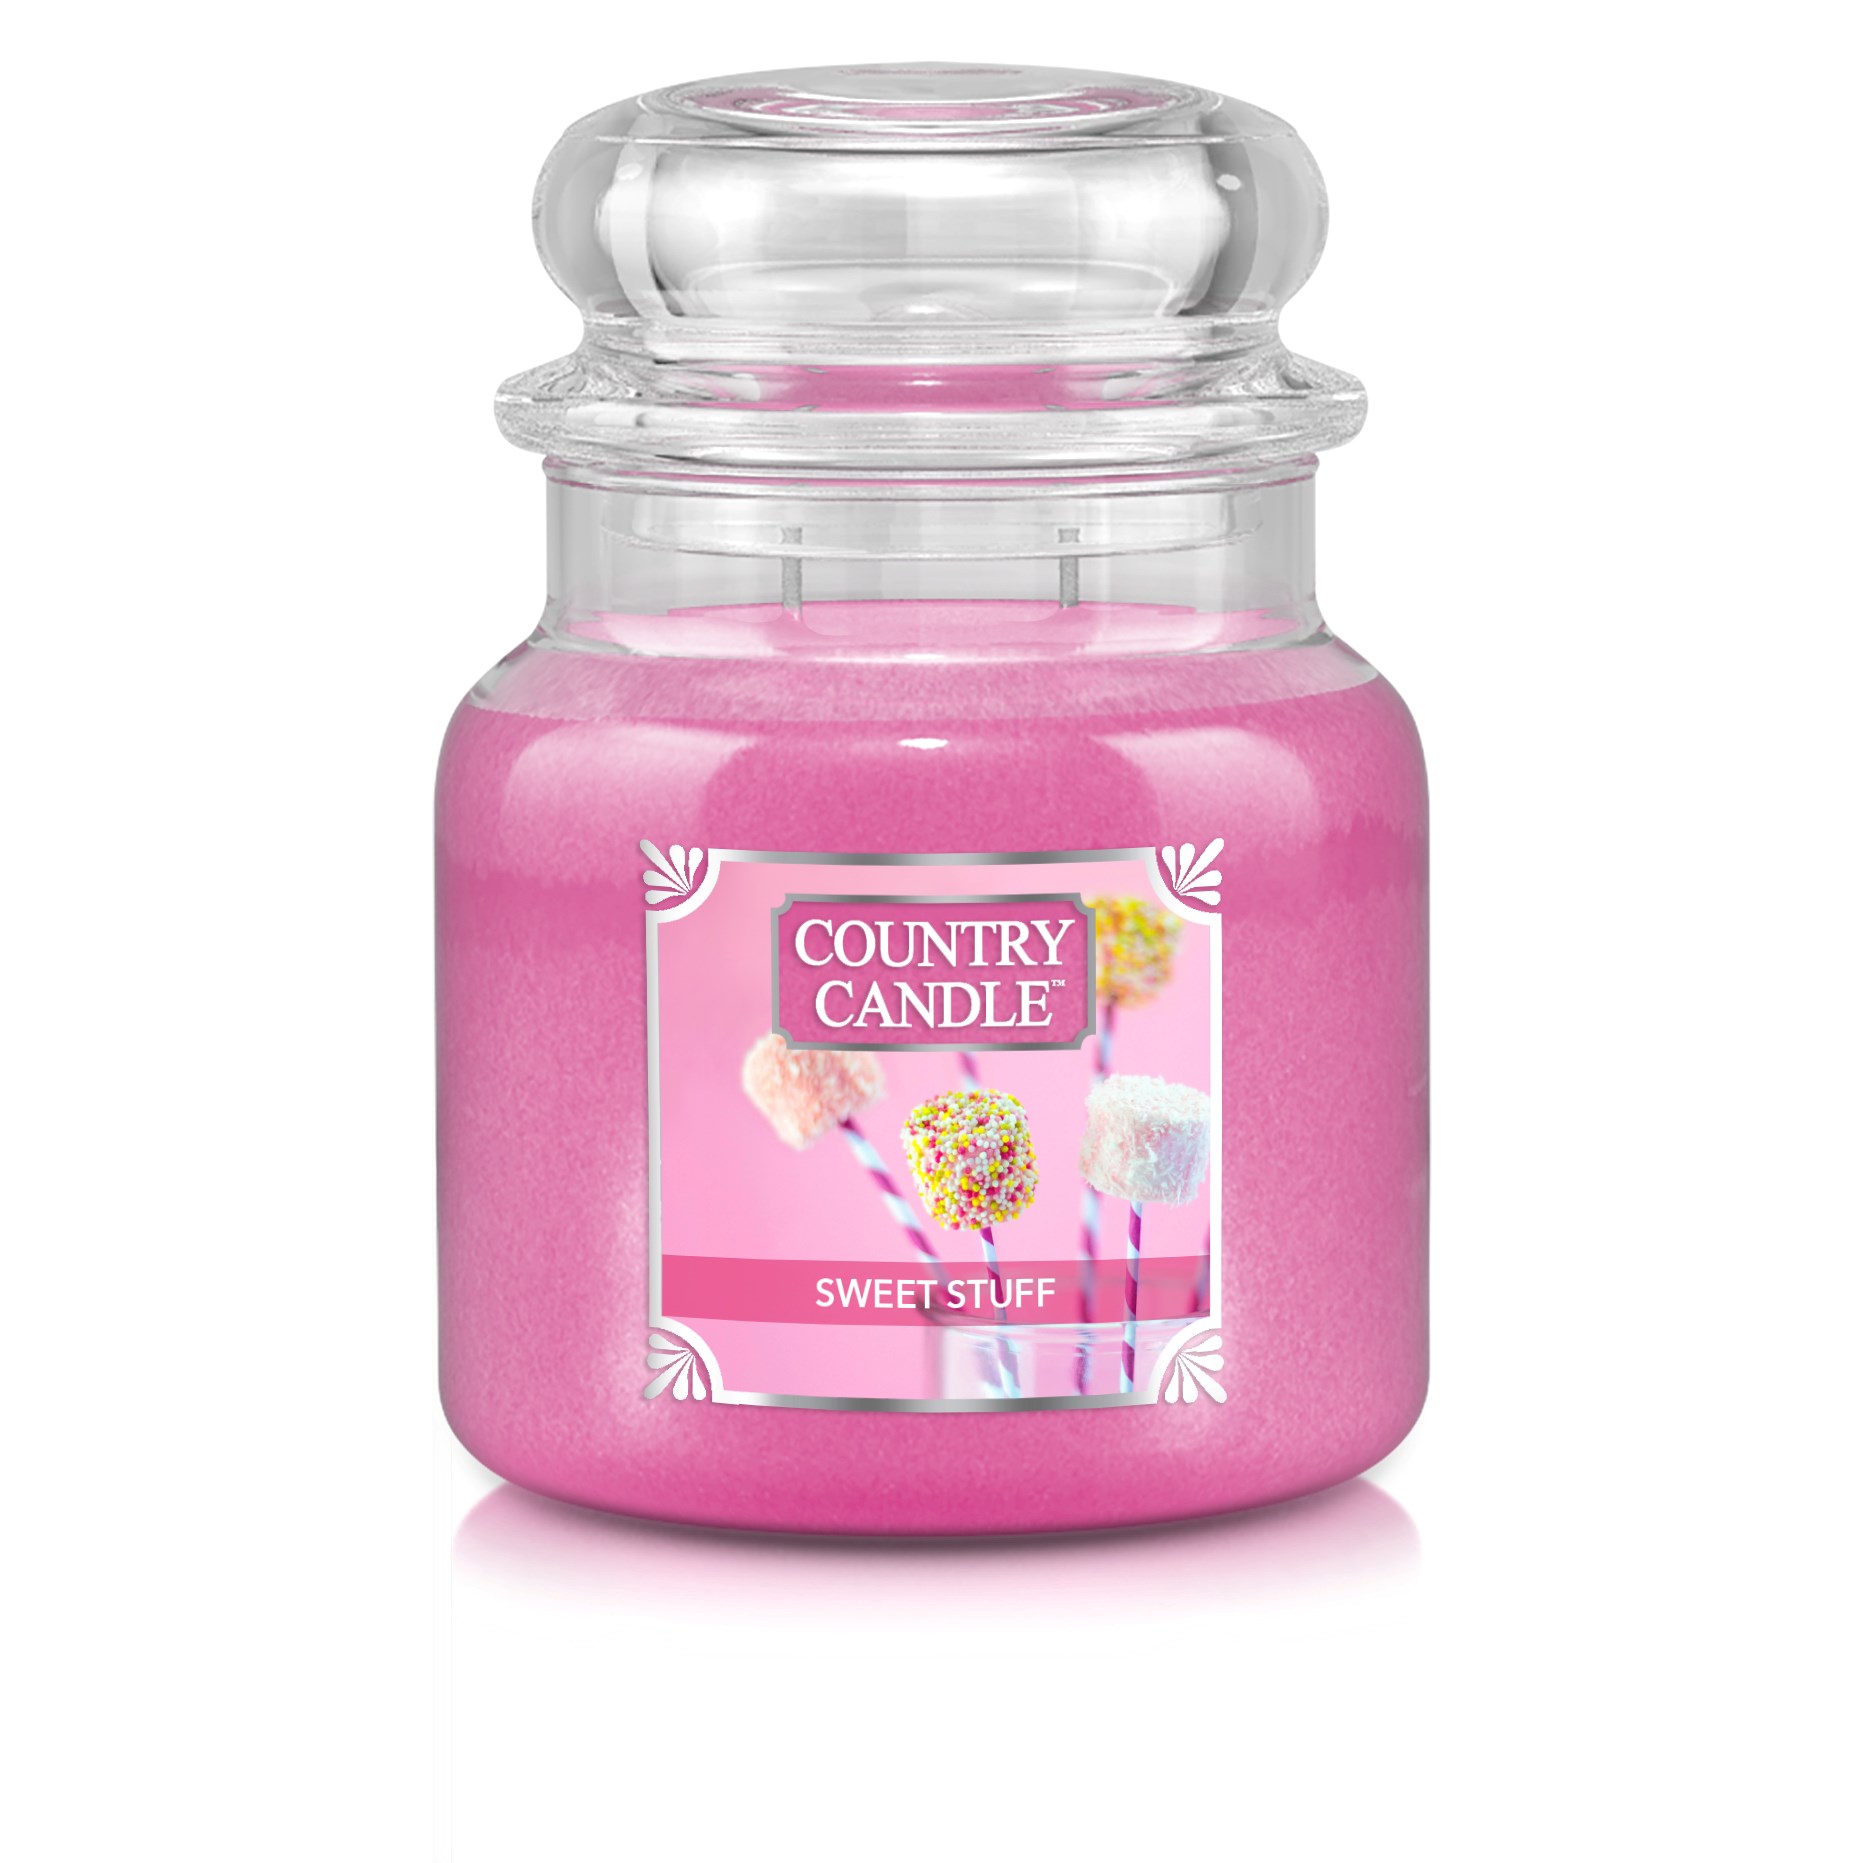 Country Candle Sweet Stuff Medium